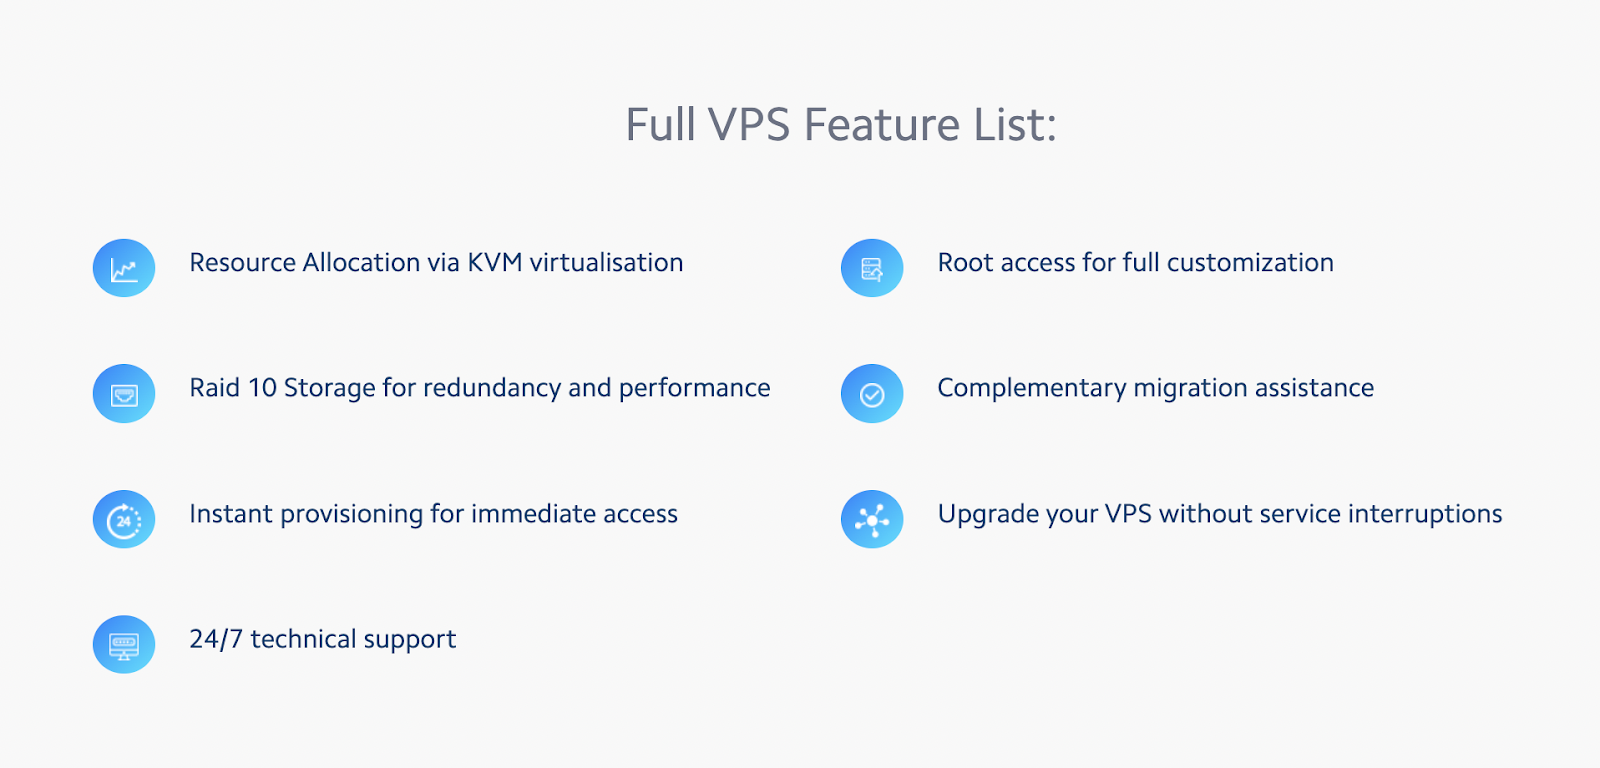 VPS Feature List